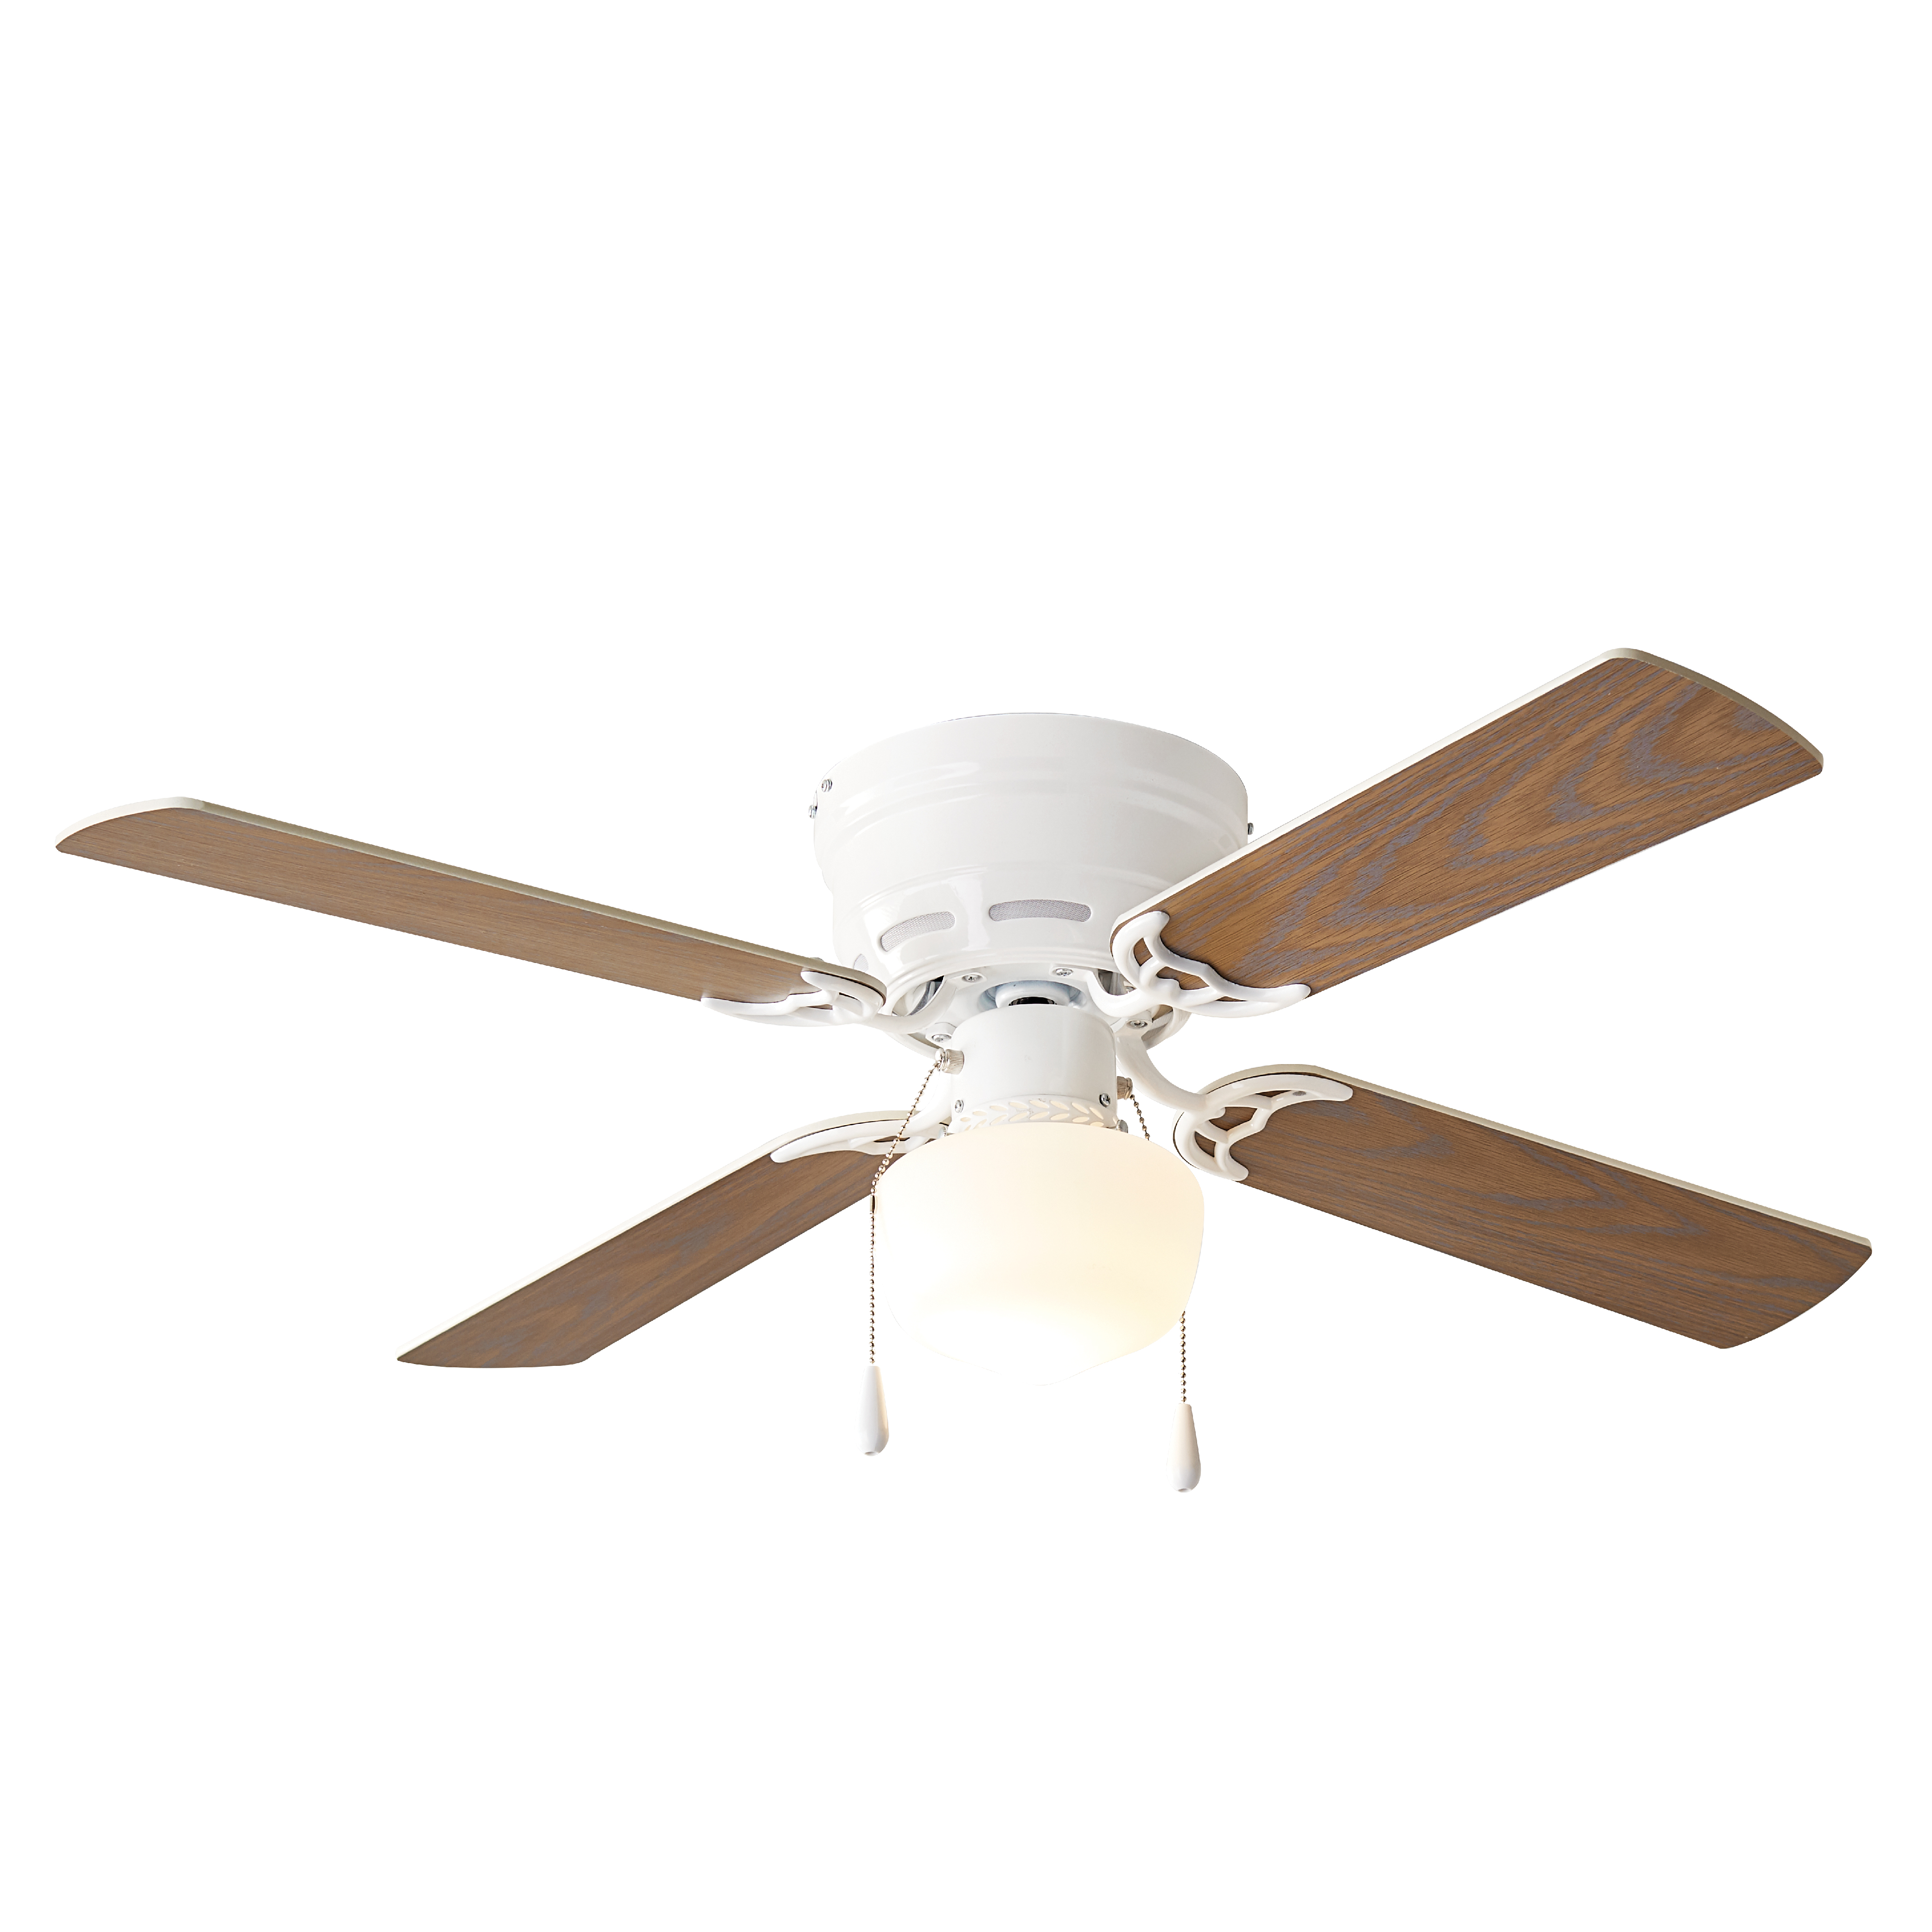 Mainstays 42 Inch Hugger Metal Indoor Ceiling Fan with Light, White, 4 Blades, LED Bulb, Reverse Airflow - image 2 of 17